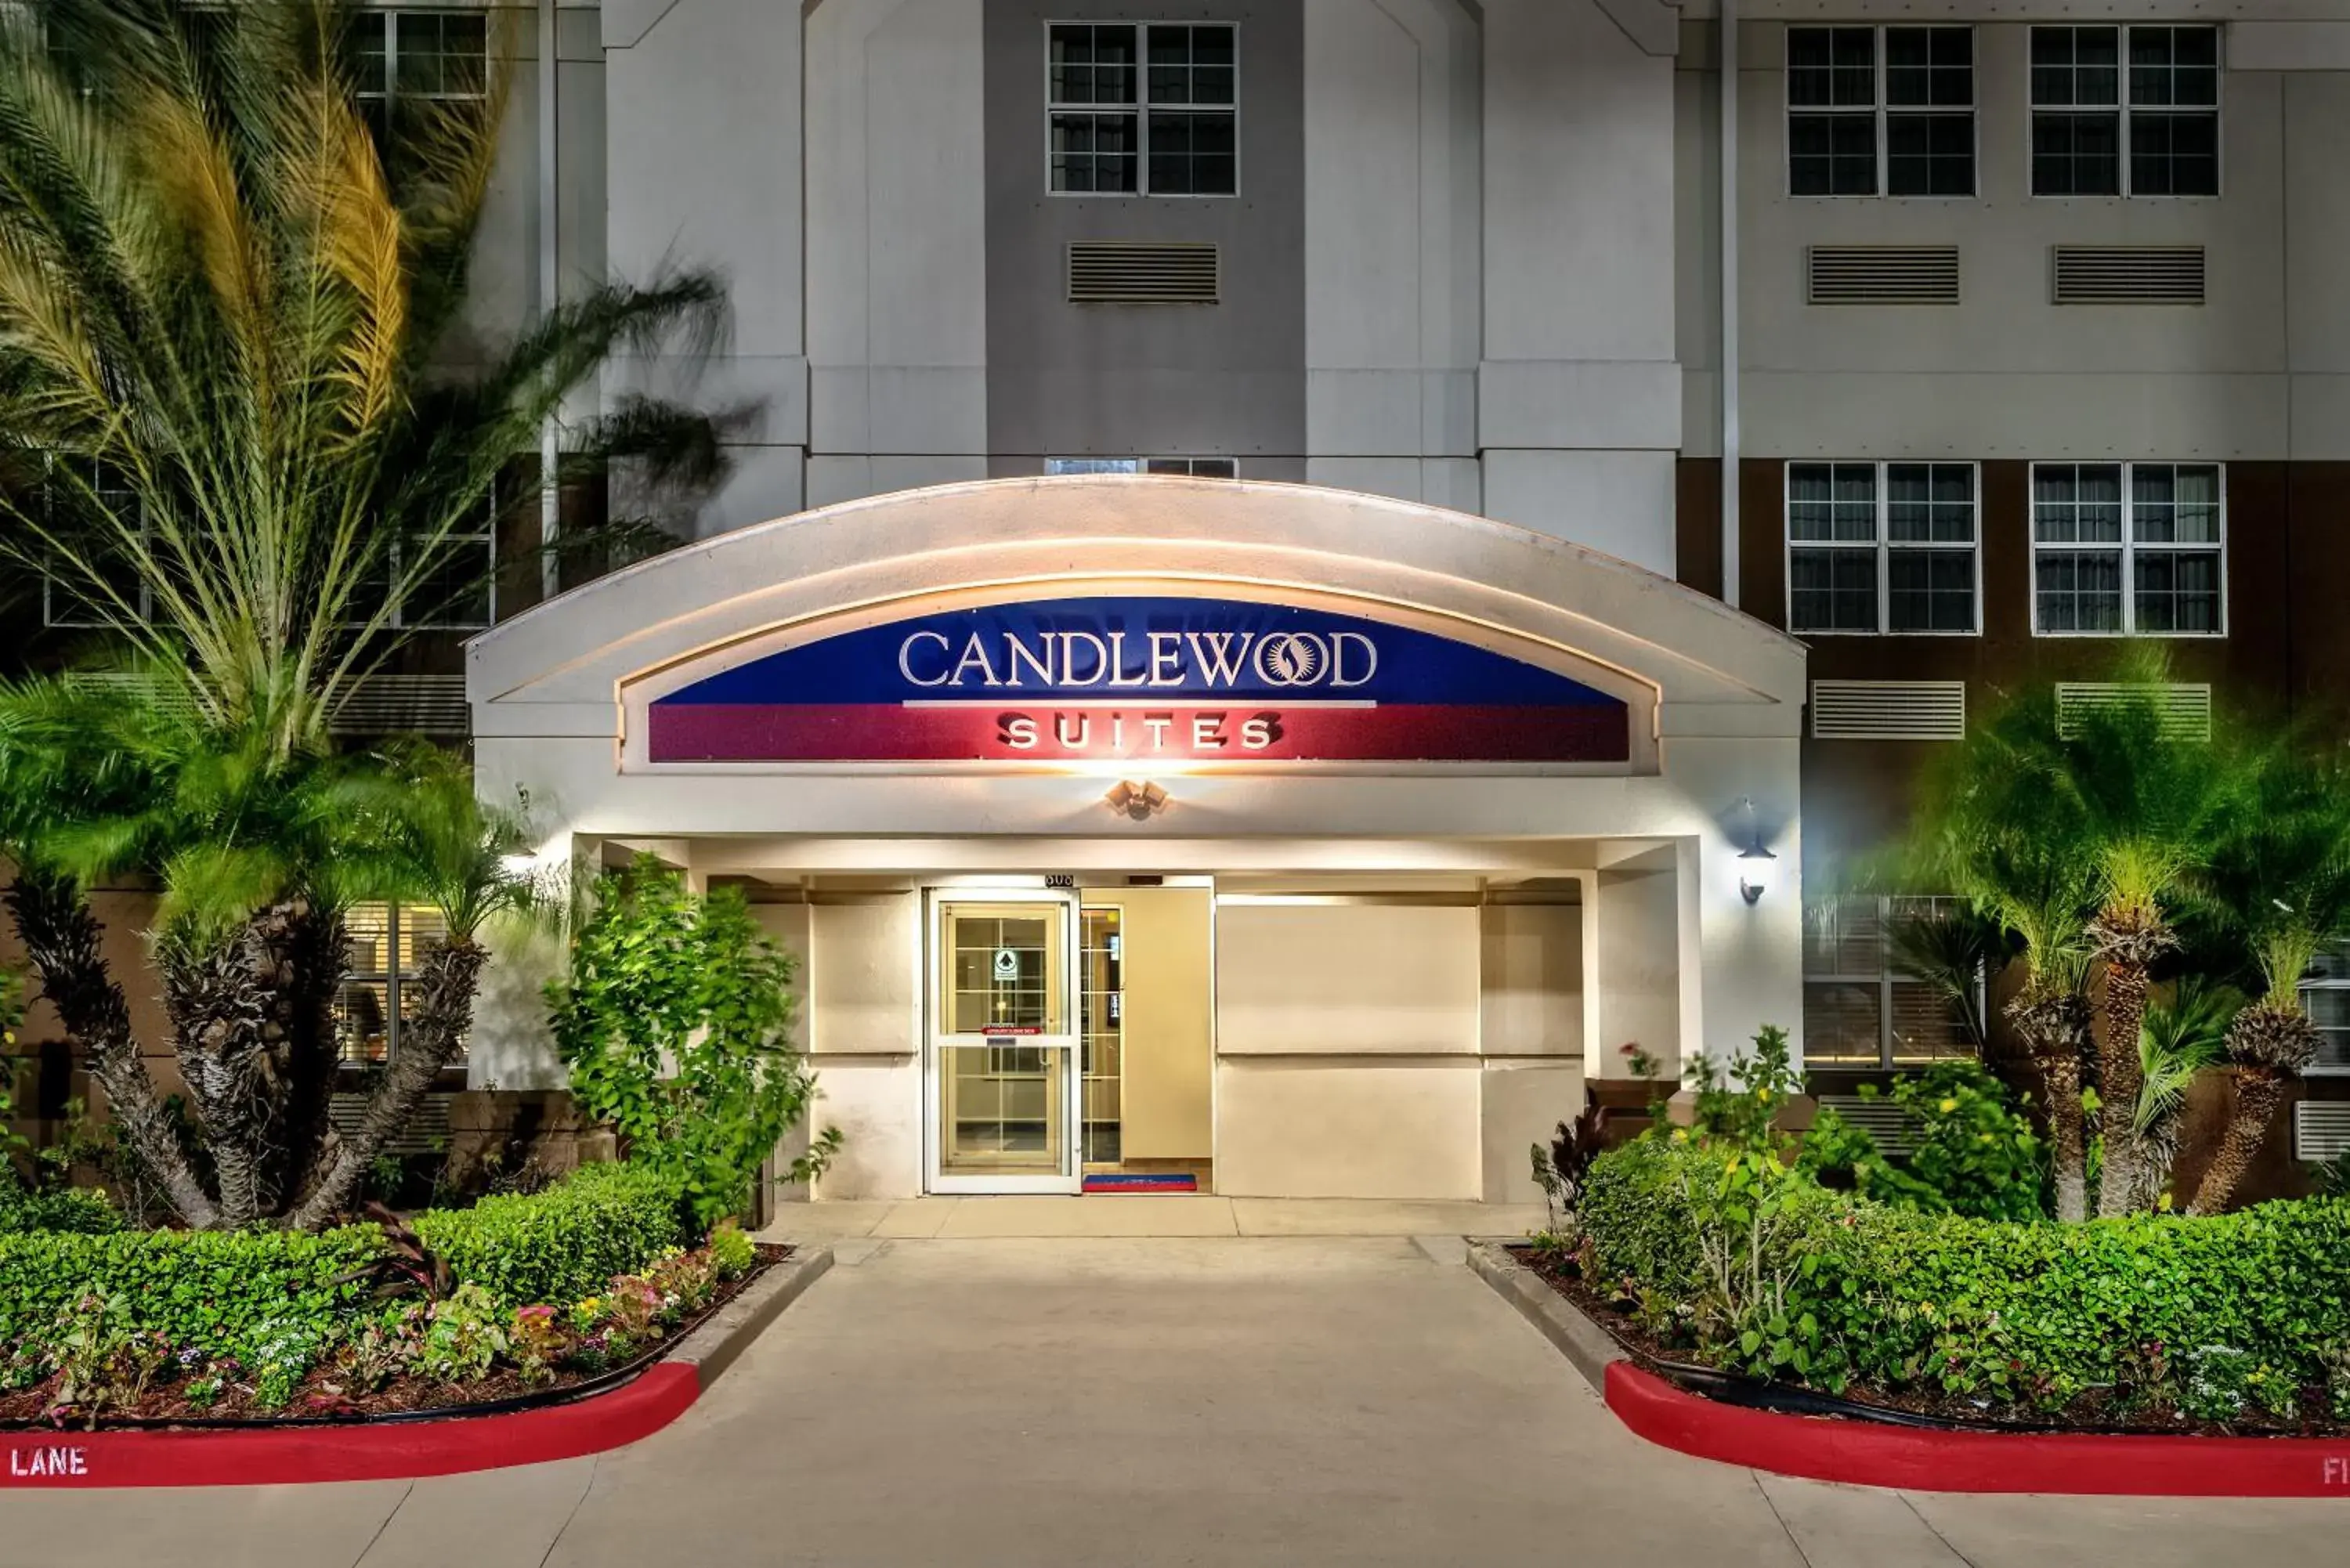 Property building in Candlewood Suites Galveston